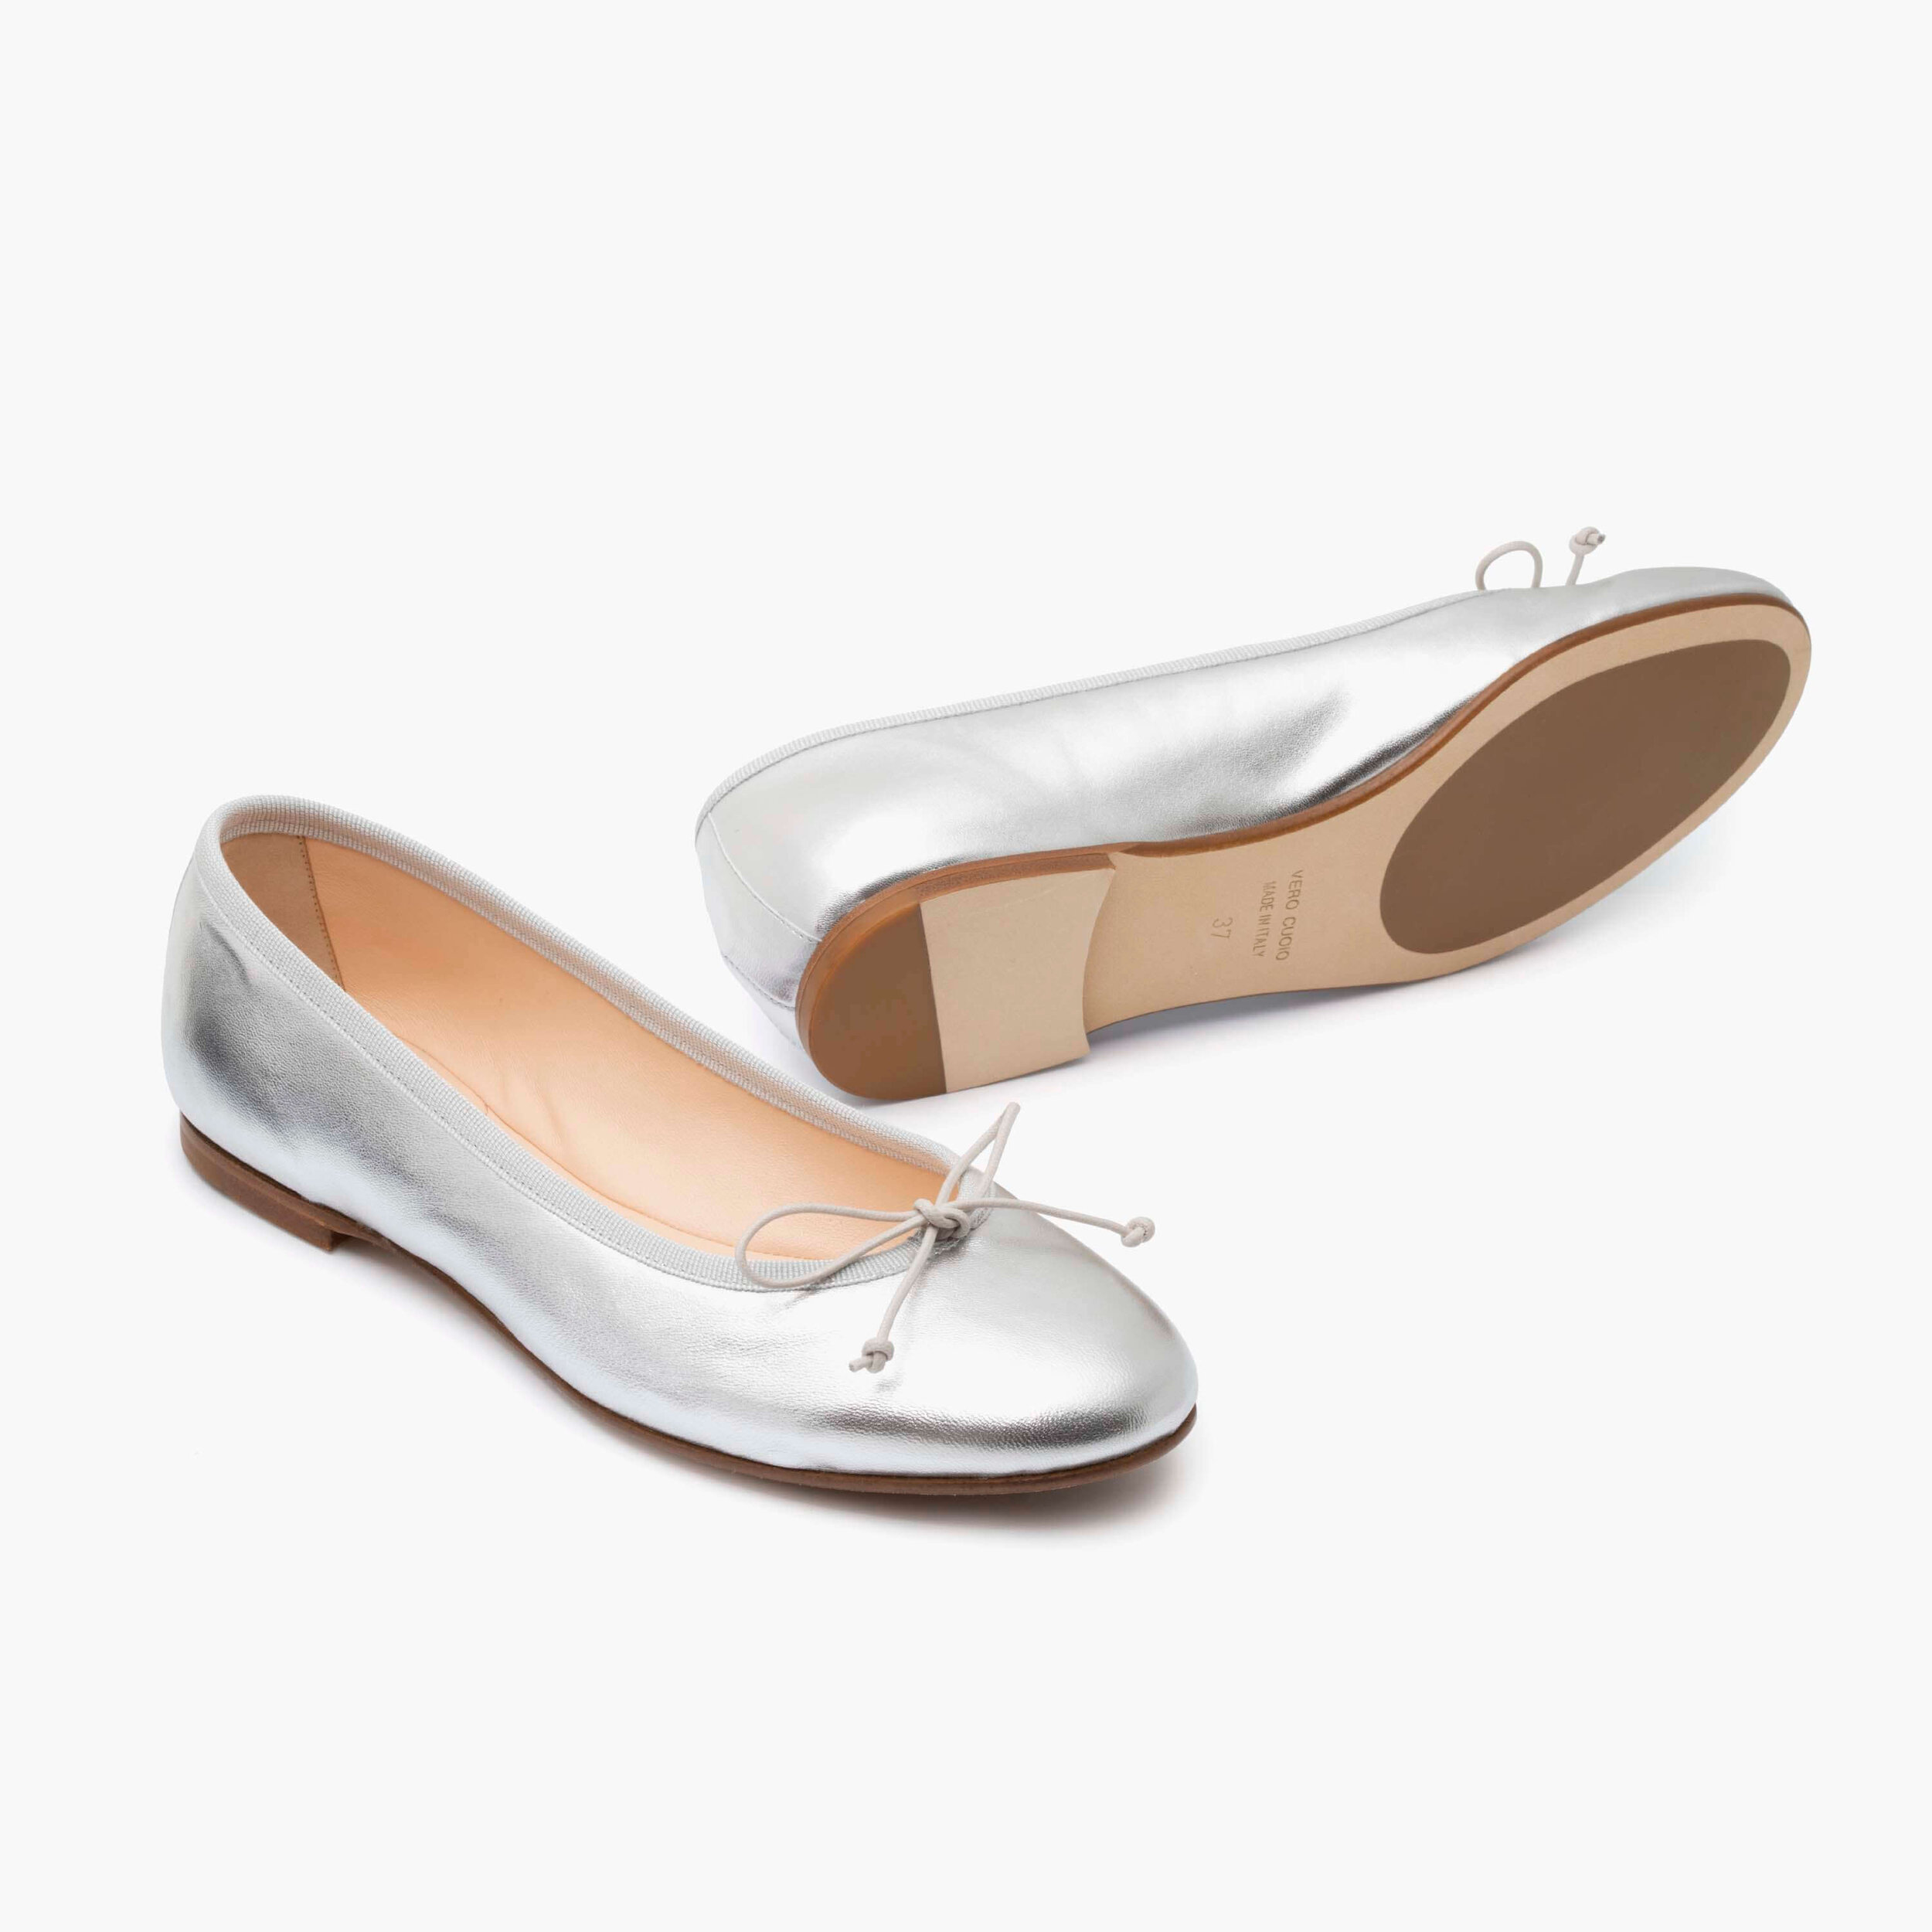 Womens Shoes Flats and flat shoes Flat sandals Twinset Leather Sandals in Silver Metallic 